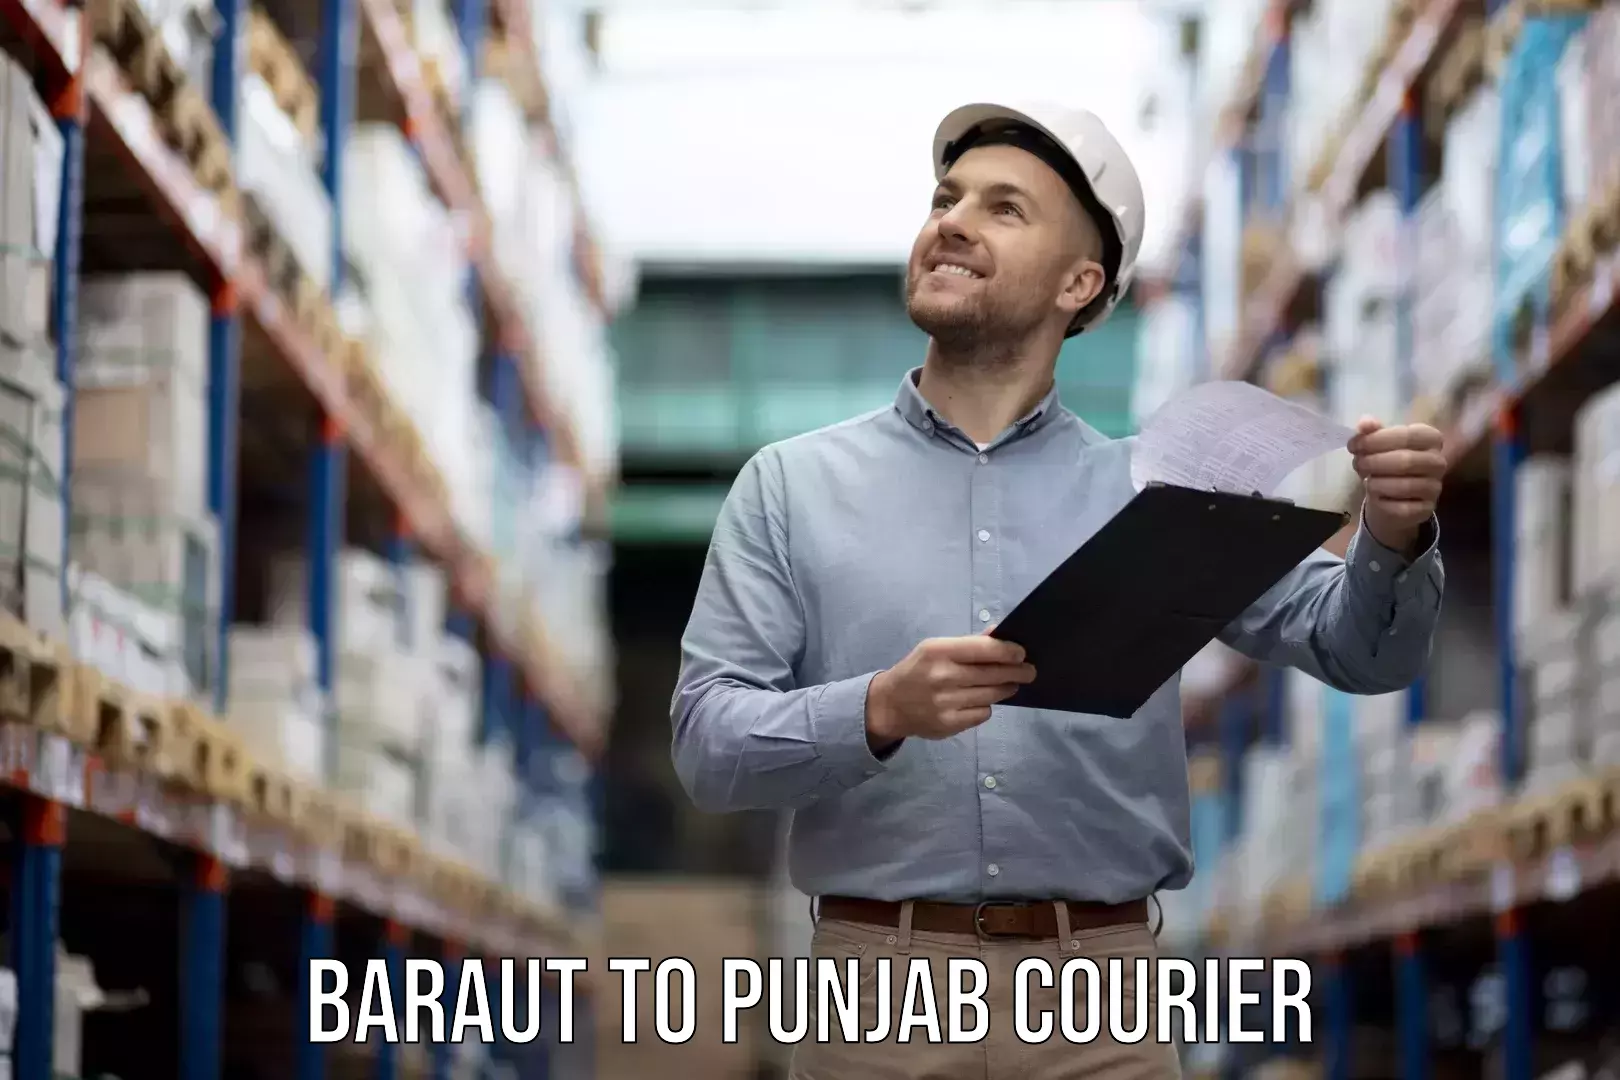 Furniture moving specialists Baraut to Punjab